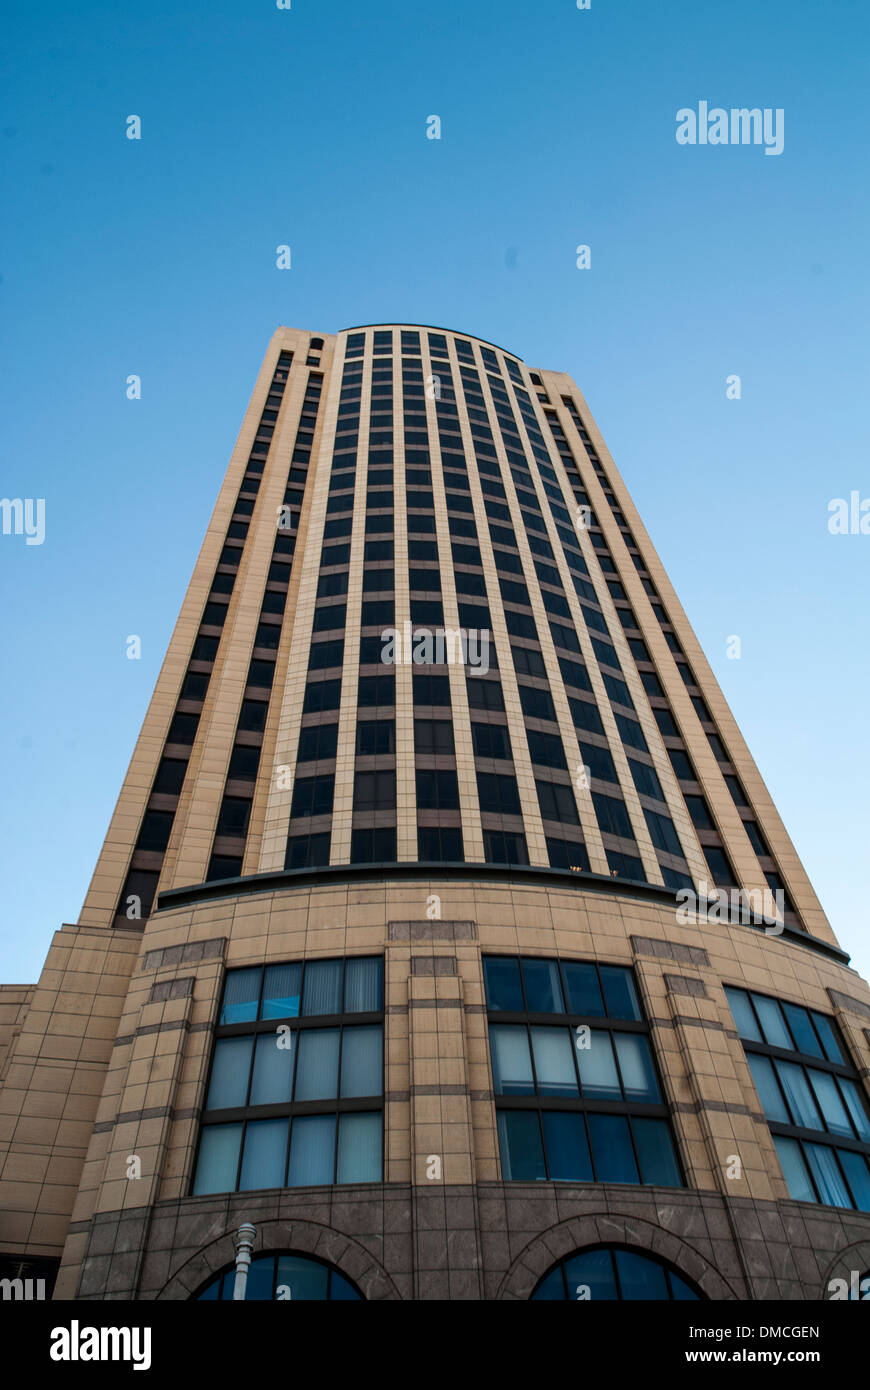 Looking up at a tall building. Stock Photo